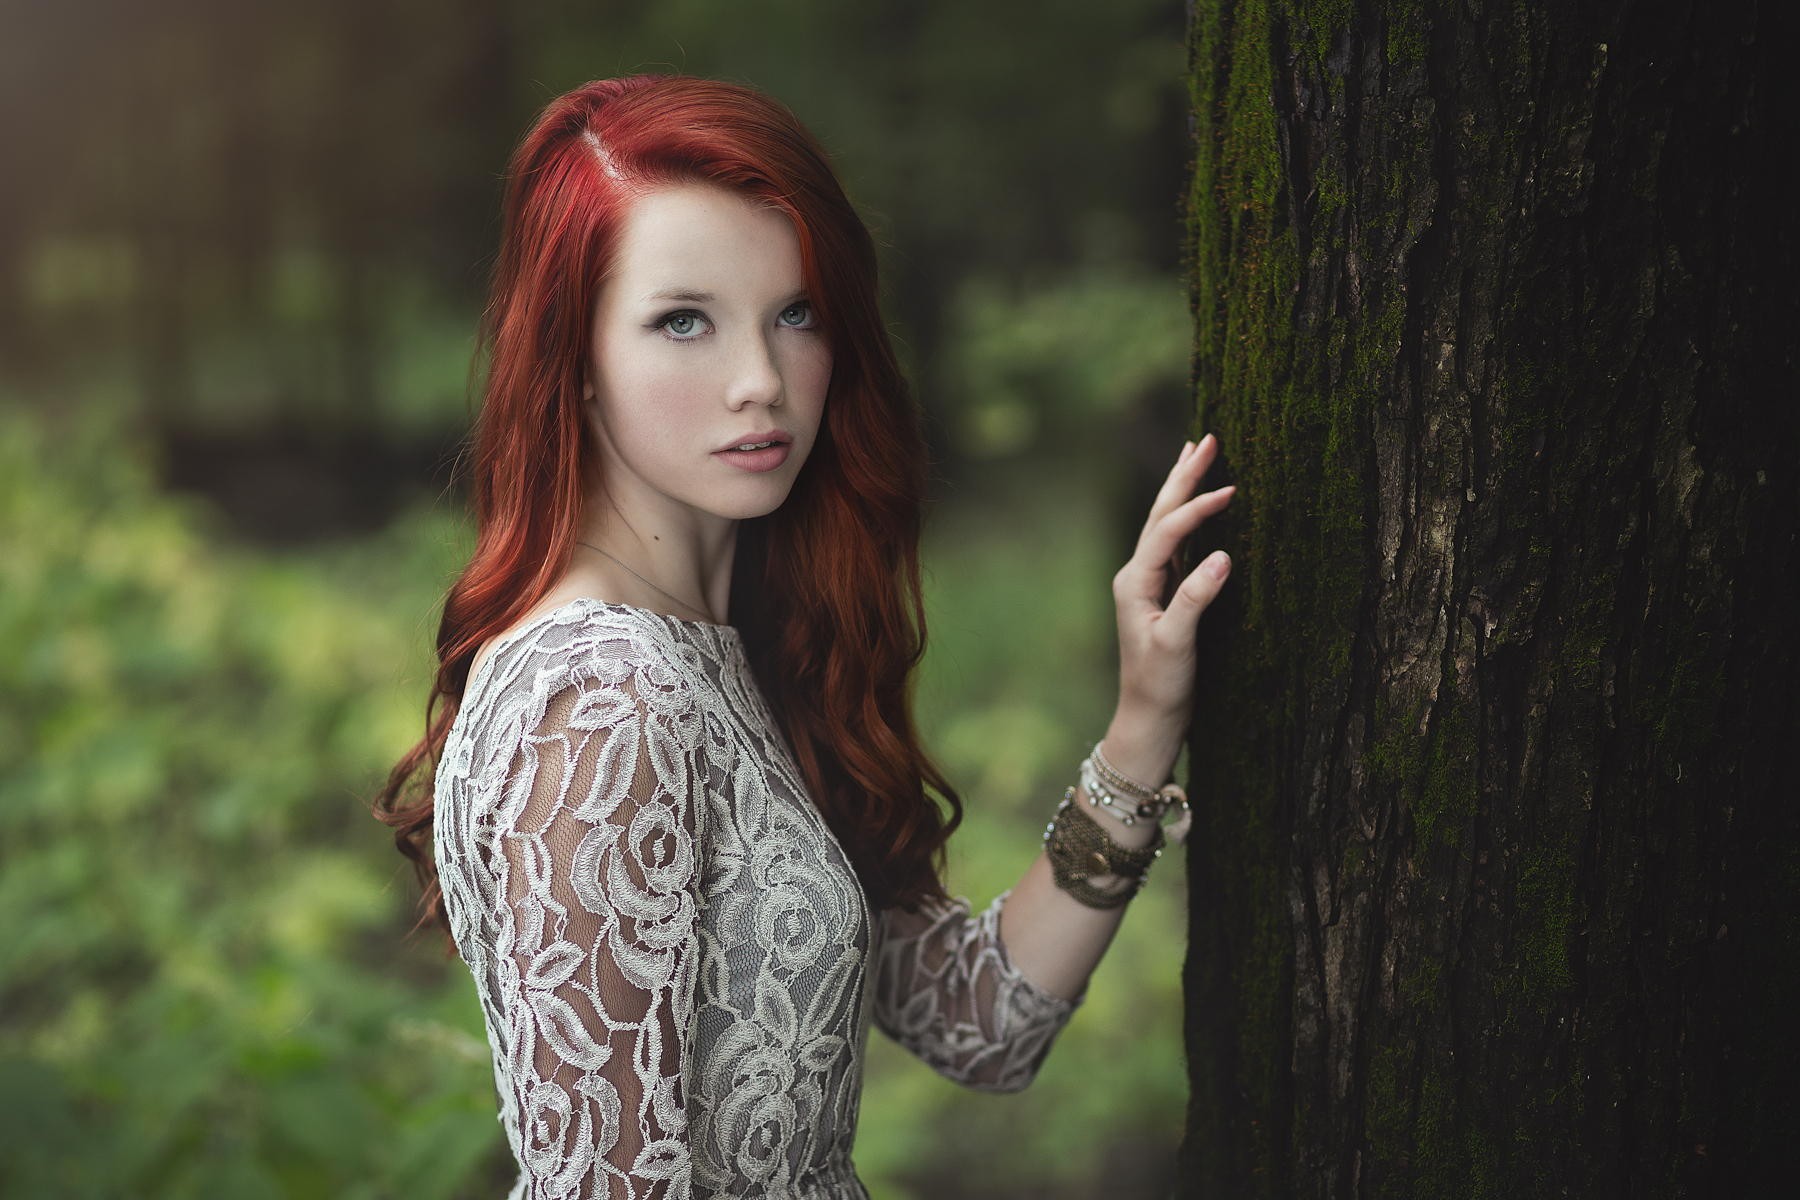 People 1800x1200 sensual gaze women model redhead long hair looking at viewer women outdoors see-through clothing white dress nature trees moss outdoors makeup dyed hair